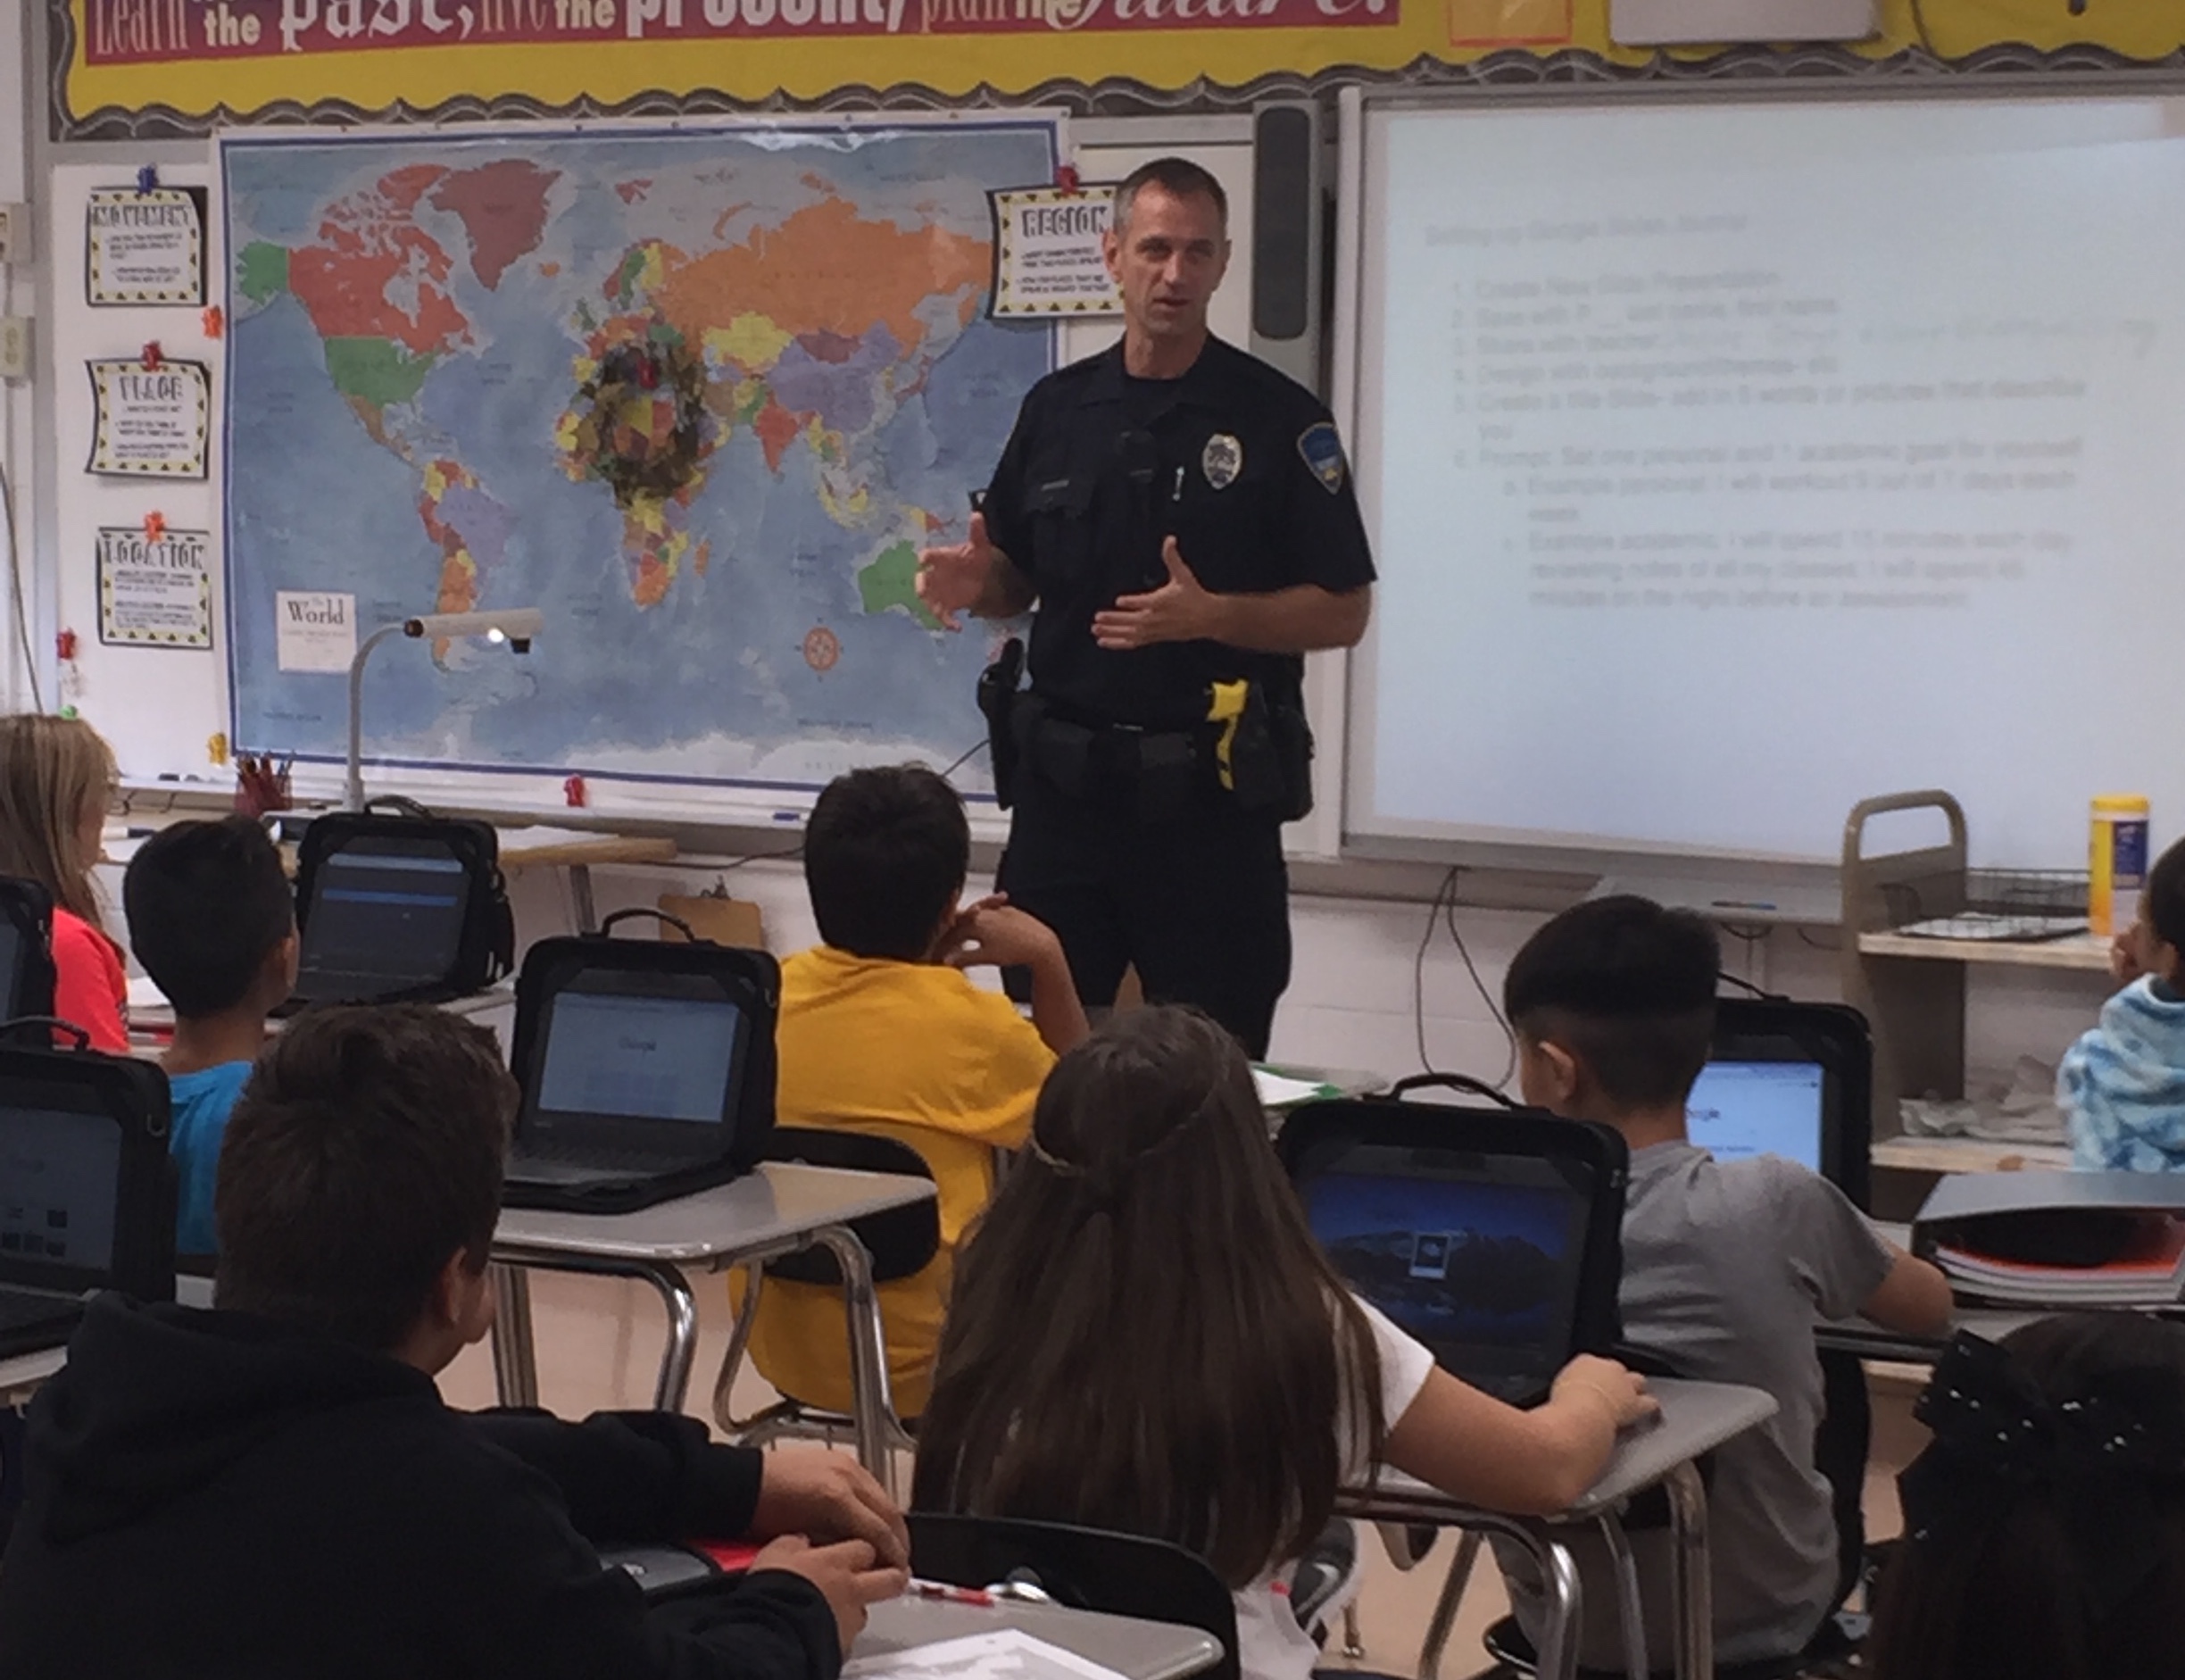 Officer Potter speaking to students